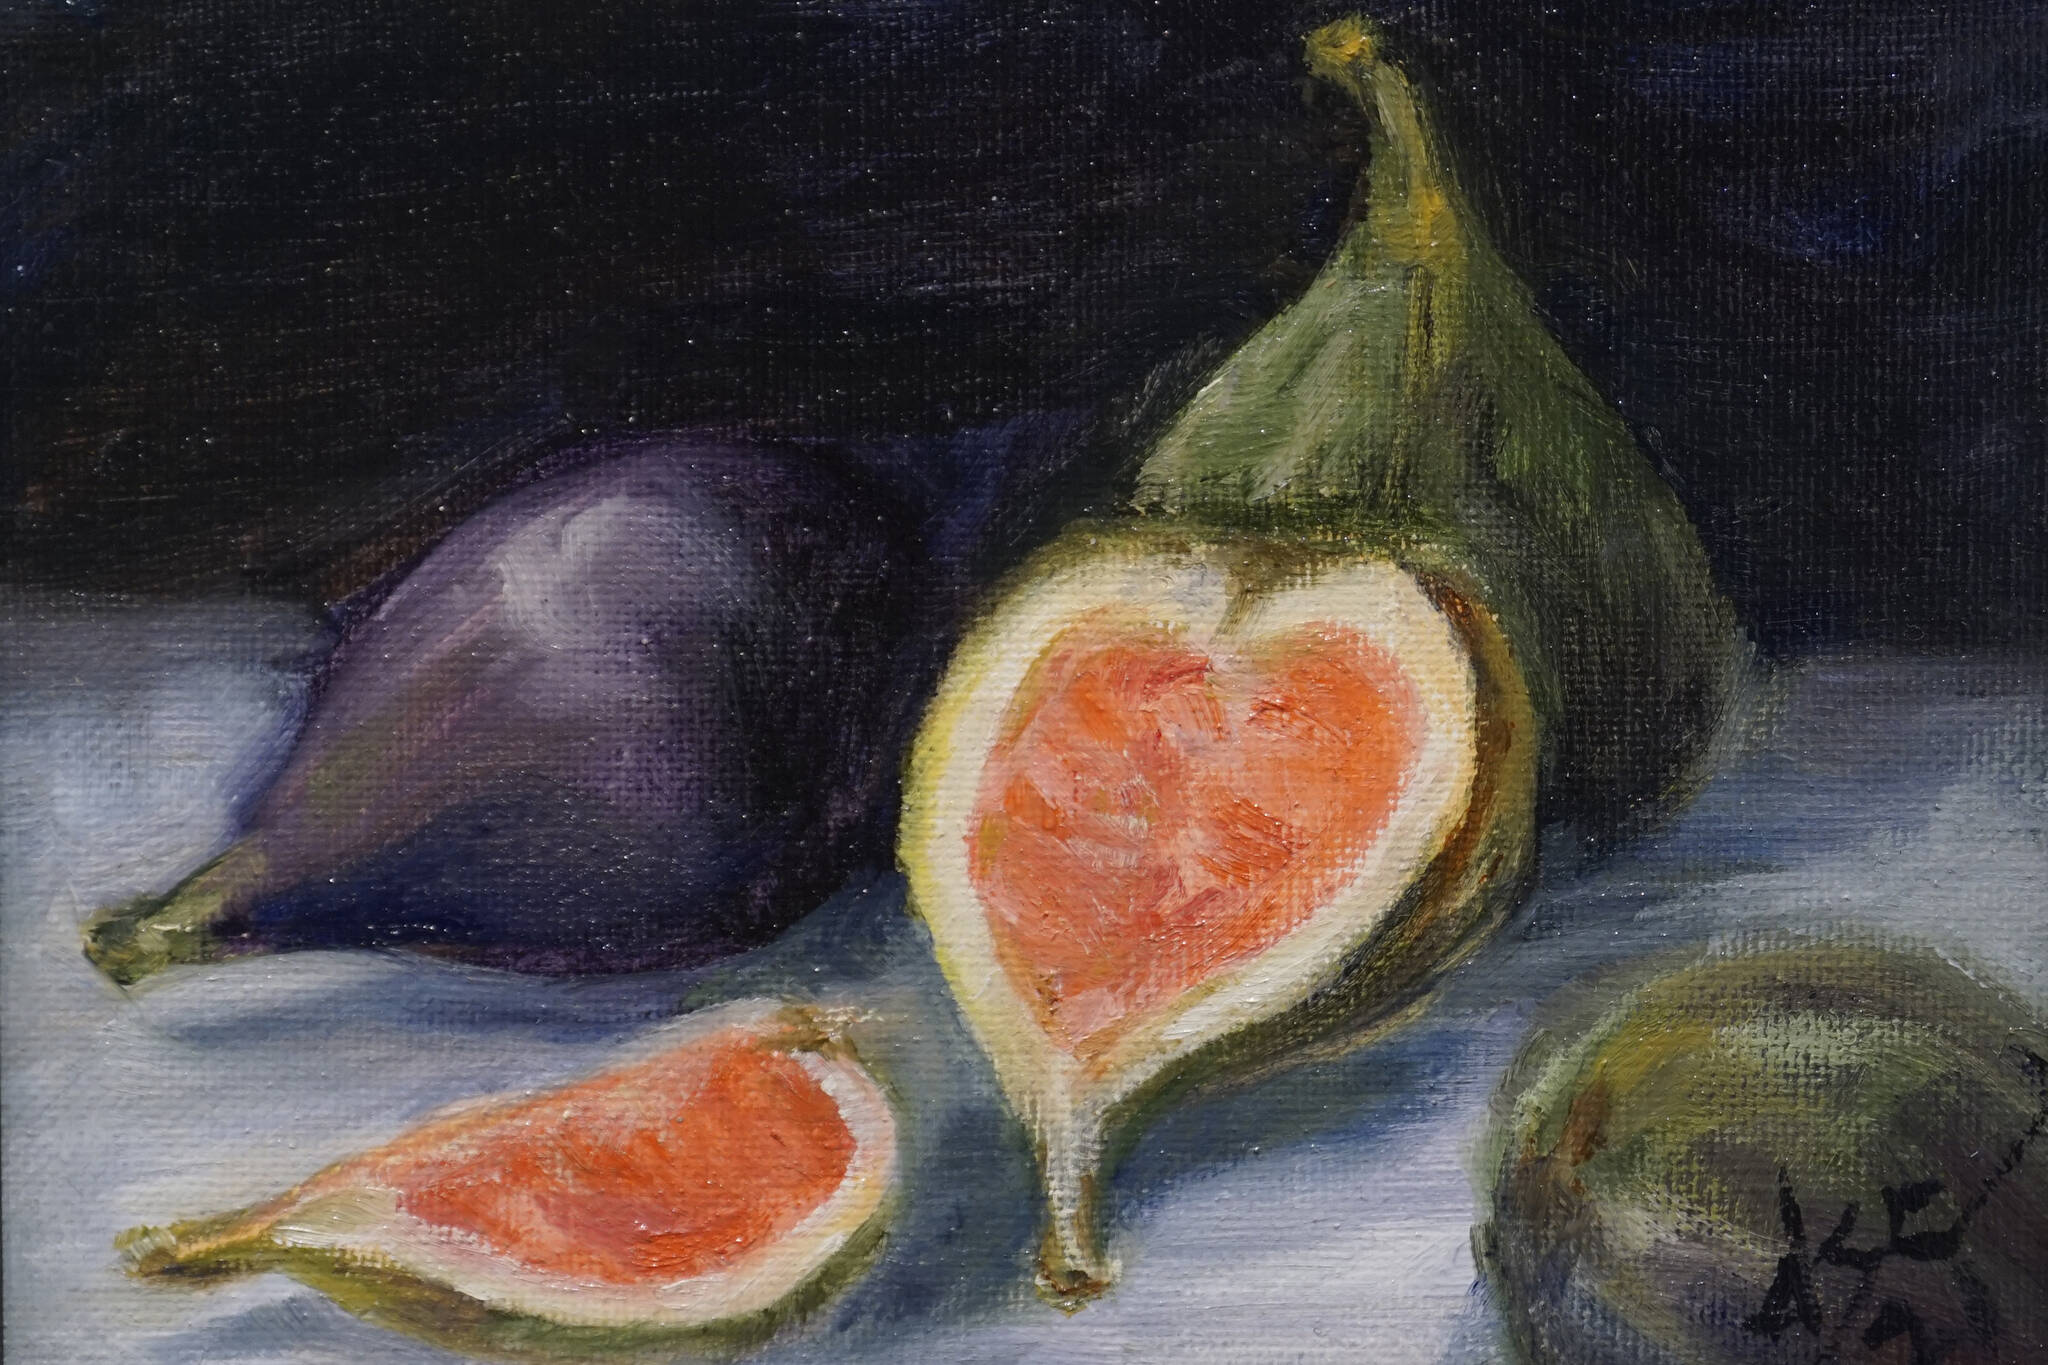 Dianne Spence-Chorman’s “Fig Study” is one of the works showing in the Homer Council on the Arts “Fun wtih 5x7” show through Dec. 22, 2021, at the gallery in Homer, Alaska. (Photo by Michael Armstrong/Homer News)